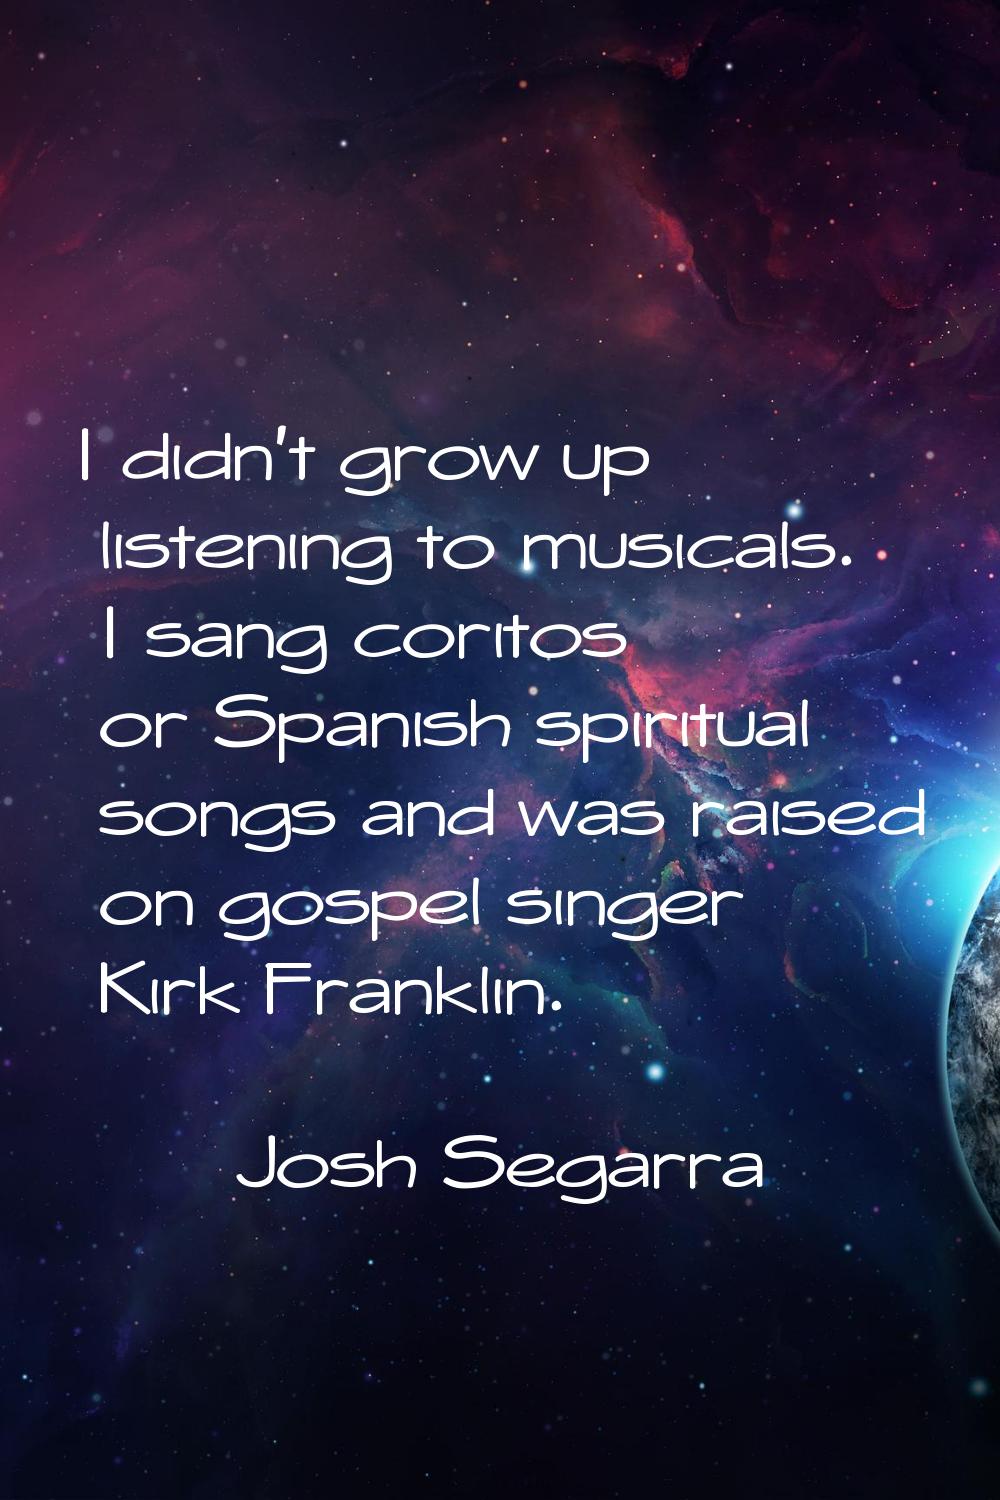 I didn't grow up listening to musicals. I sang coritos or Spanish spiritual songs and was raised on